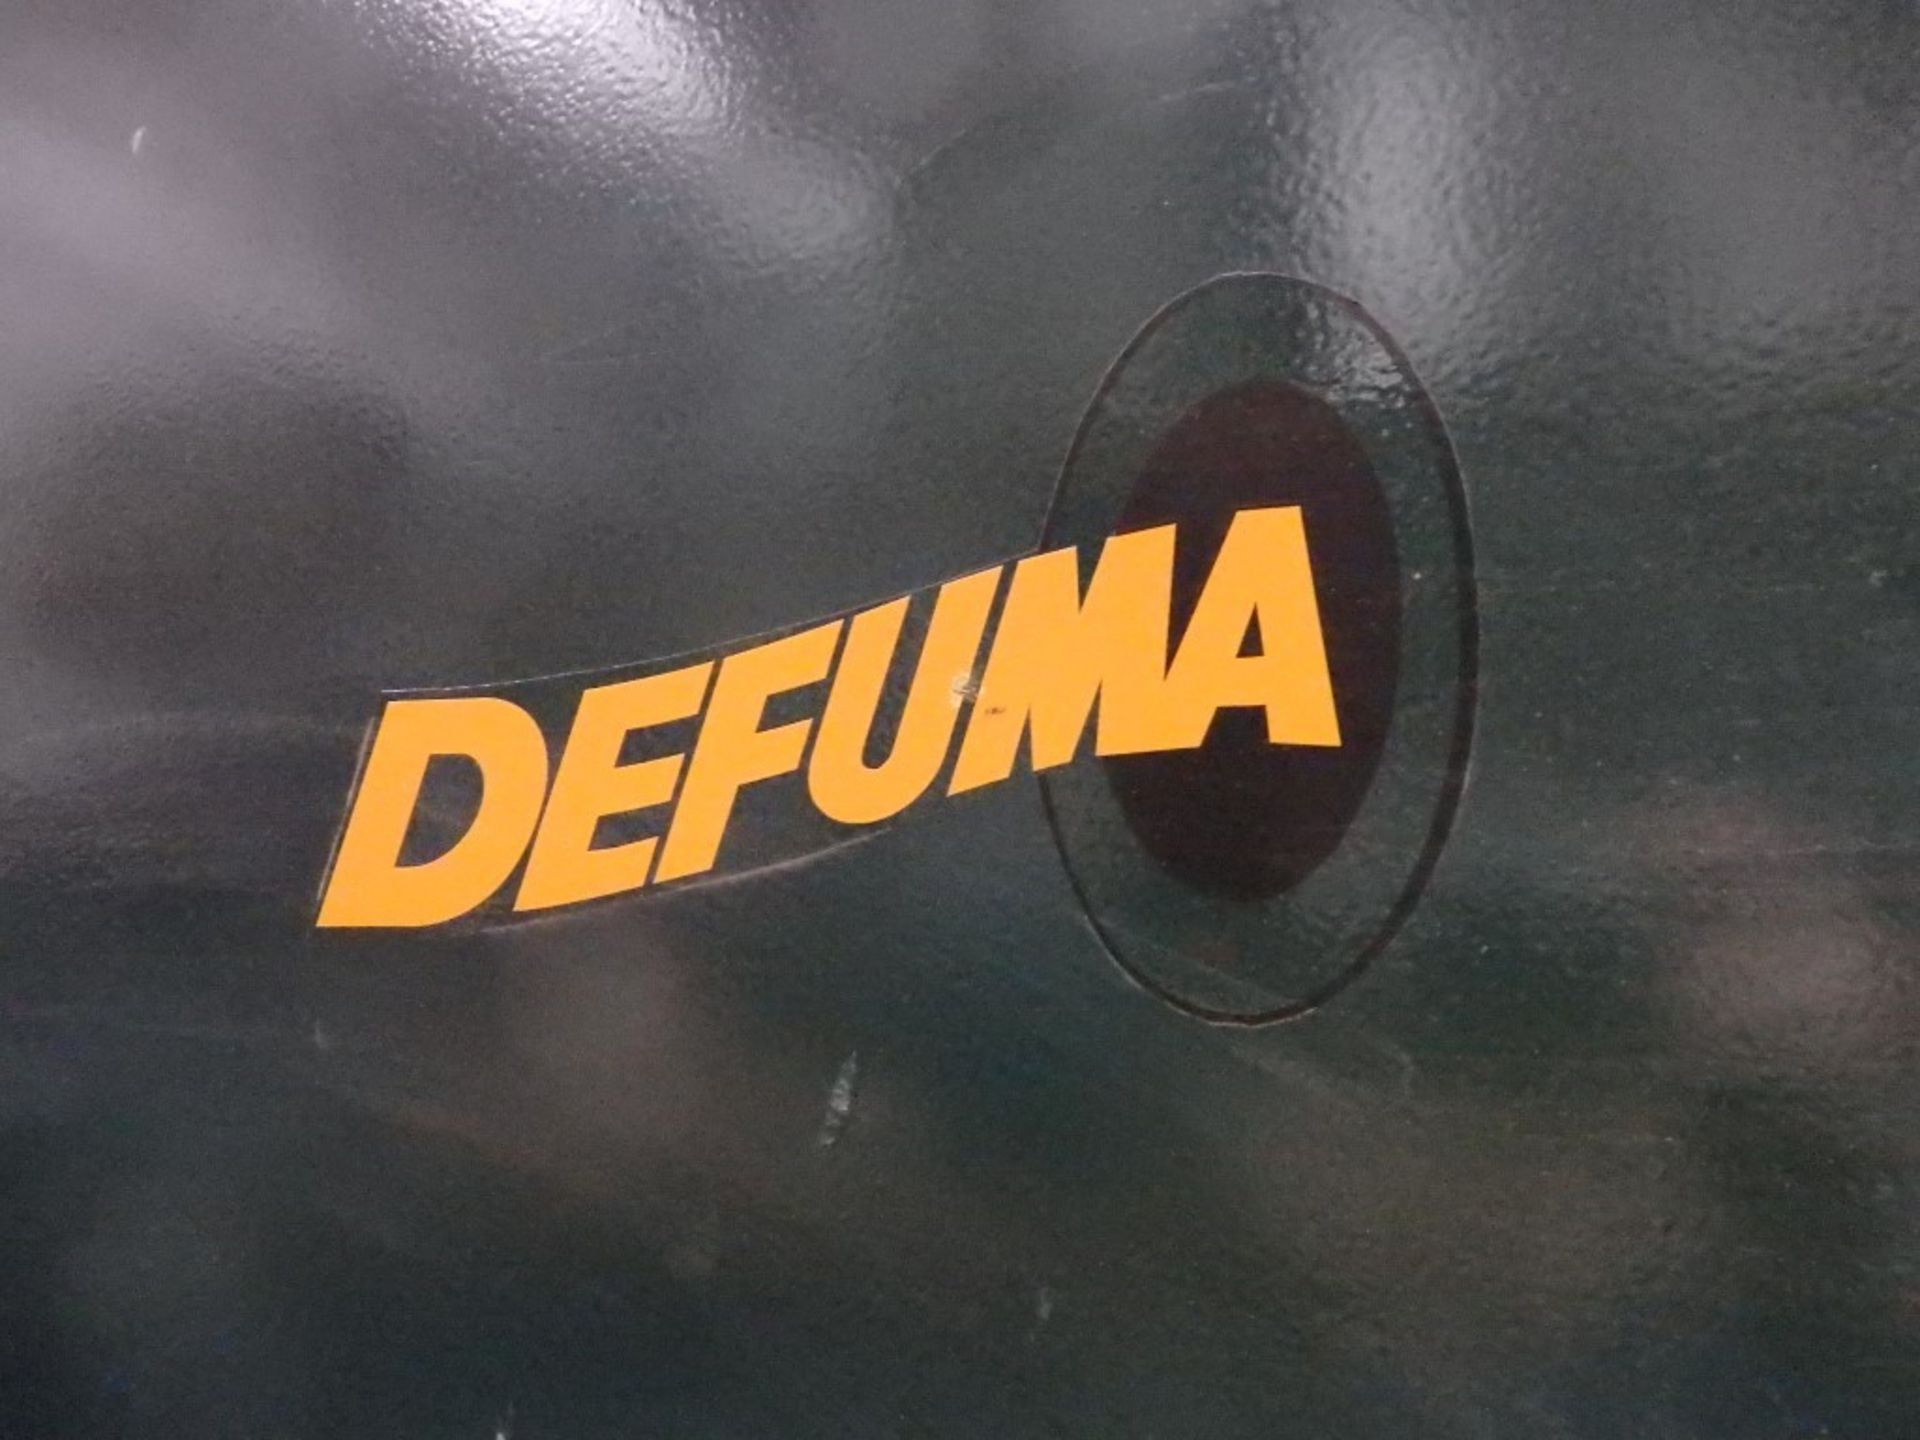 1 x Pefurma Dust Extractor - Compact self-contained unit - CL057 - Ref WPM098 - Location: Welwyn, - Image 11 of 13